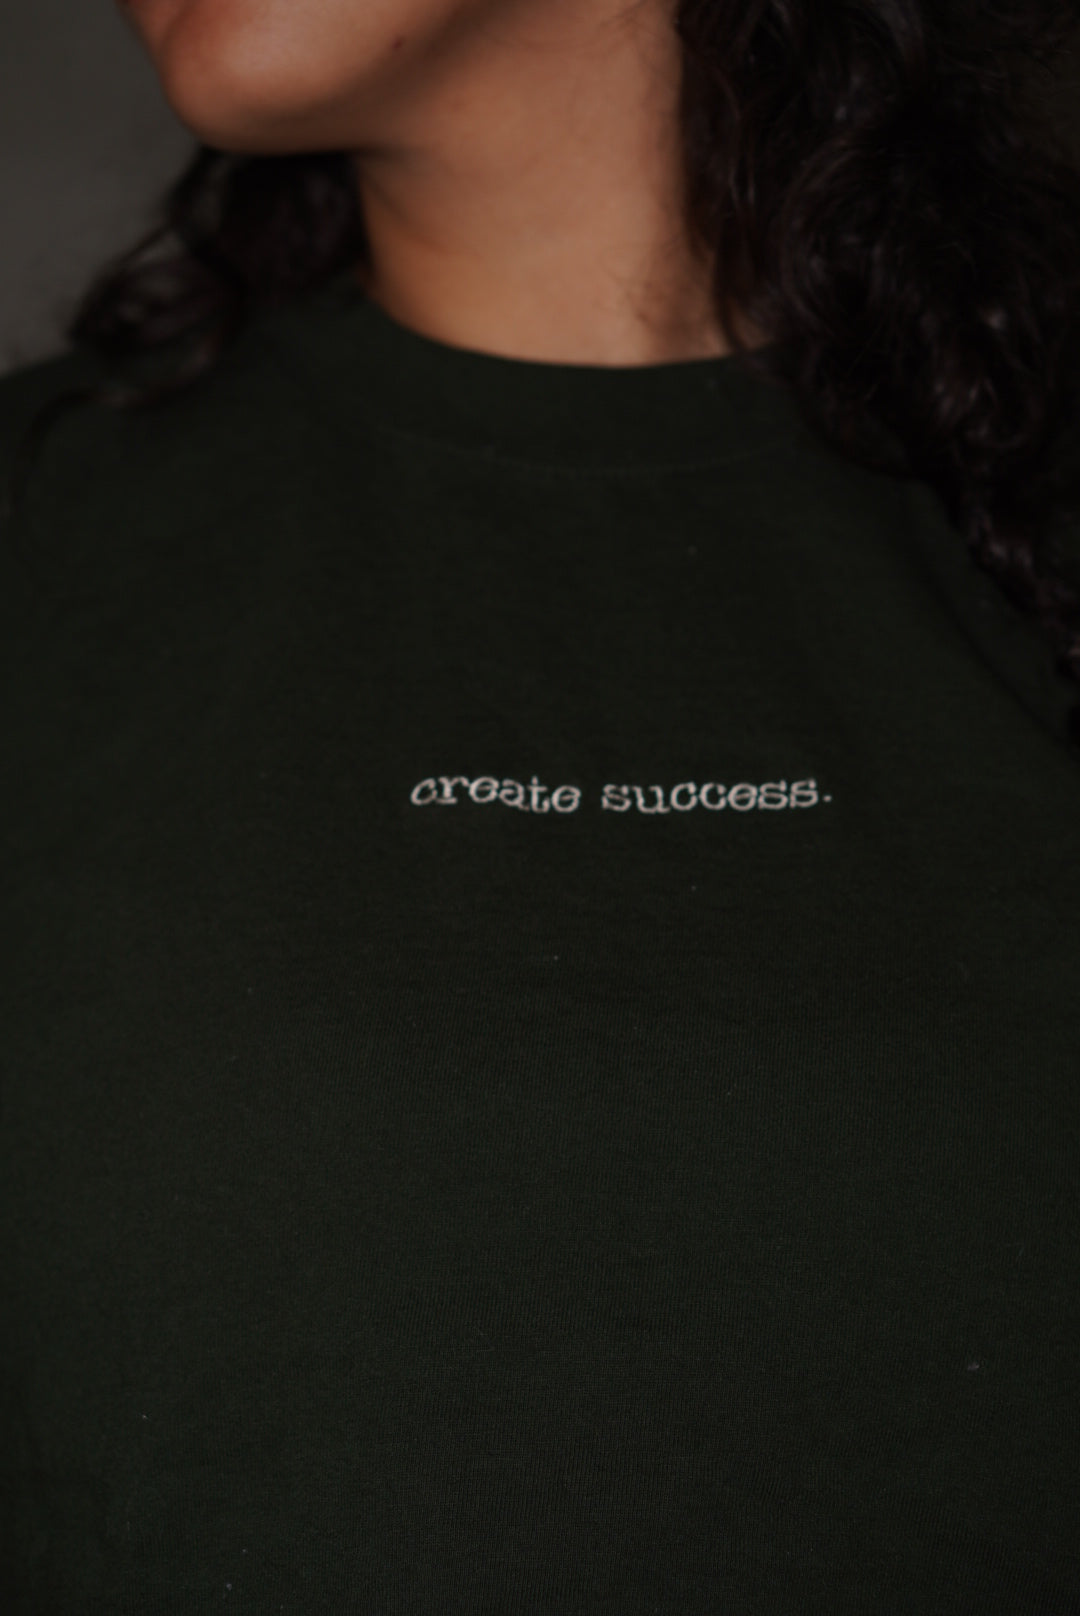 Olive the Success Tee